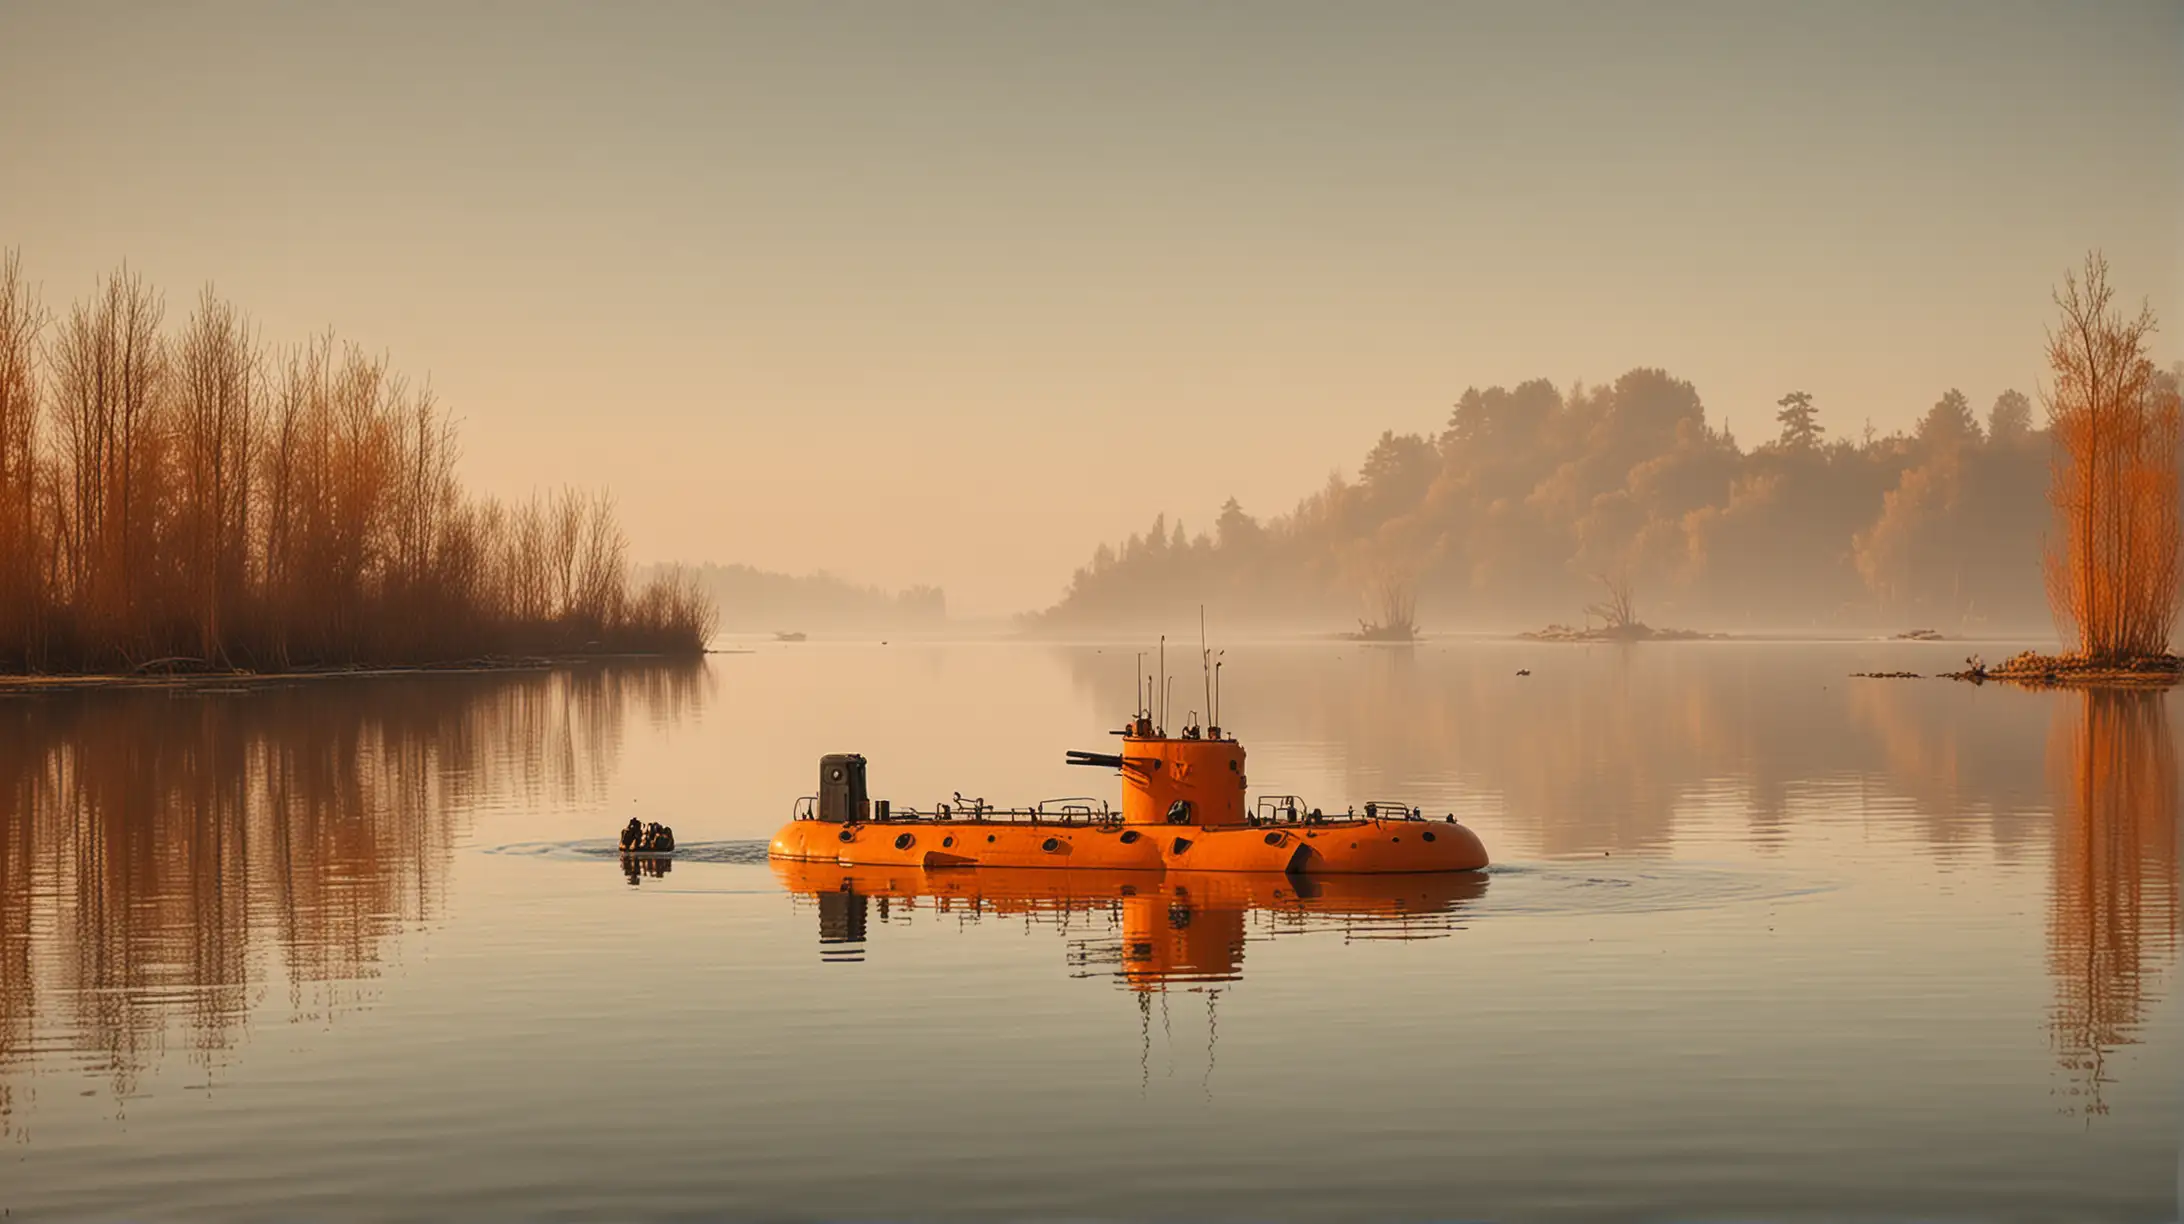 a strange lake with three island, a small submarine in a little bay, orange atmosphere, sunny